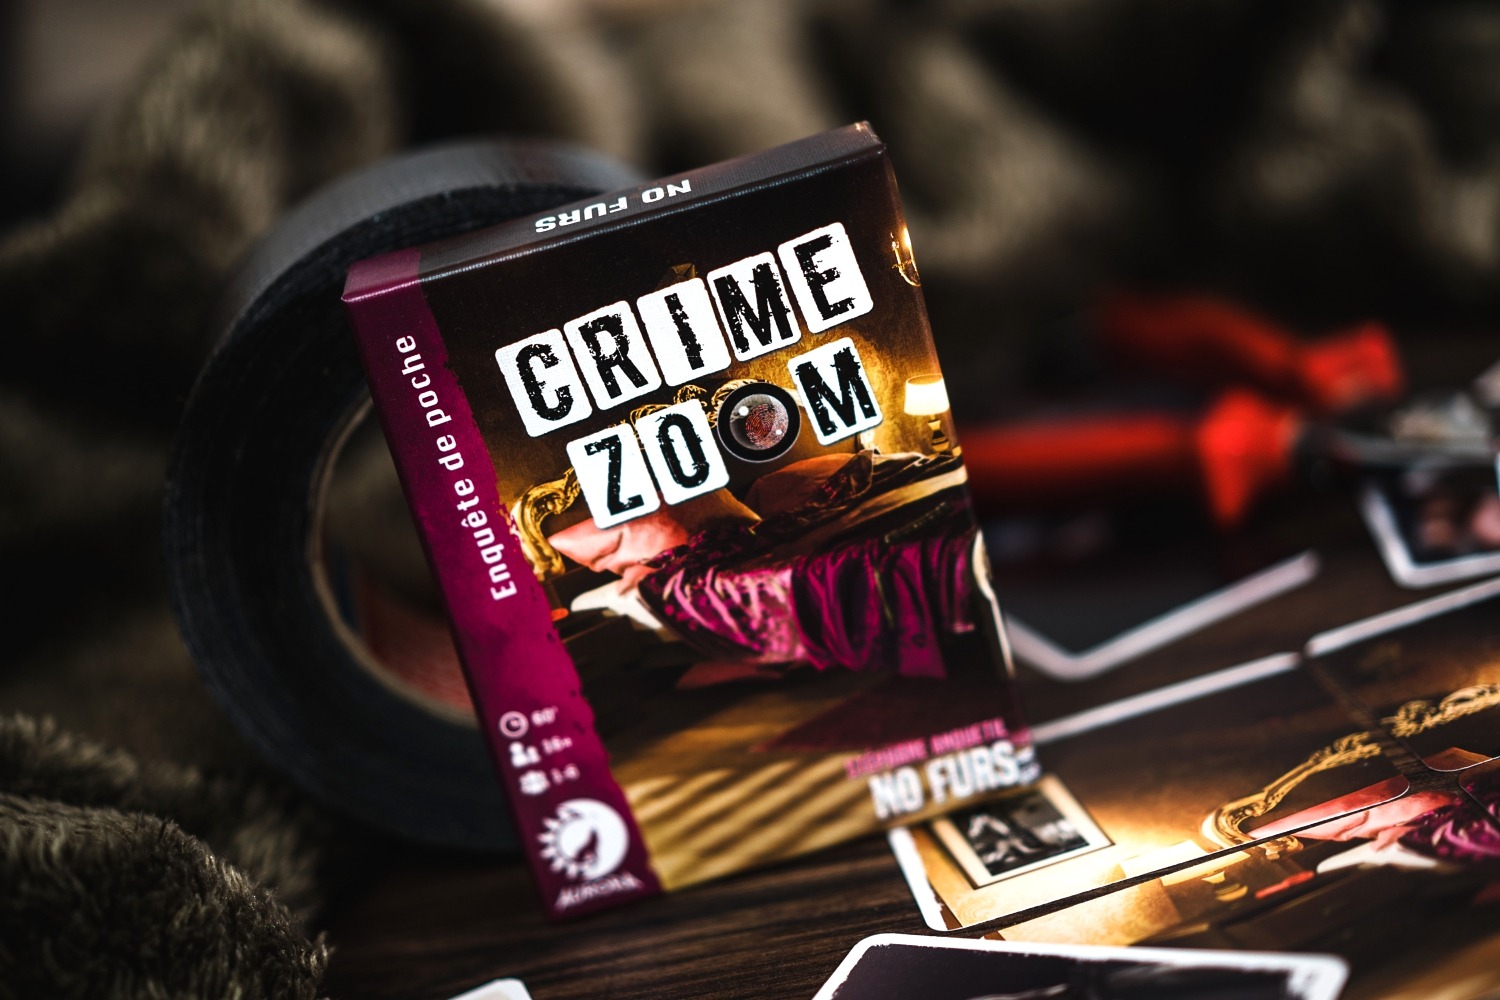 Crime zoom no furs aurora games boardgame photography